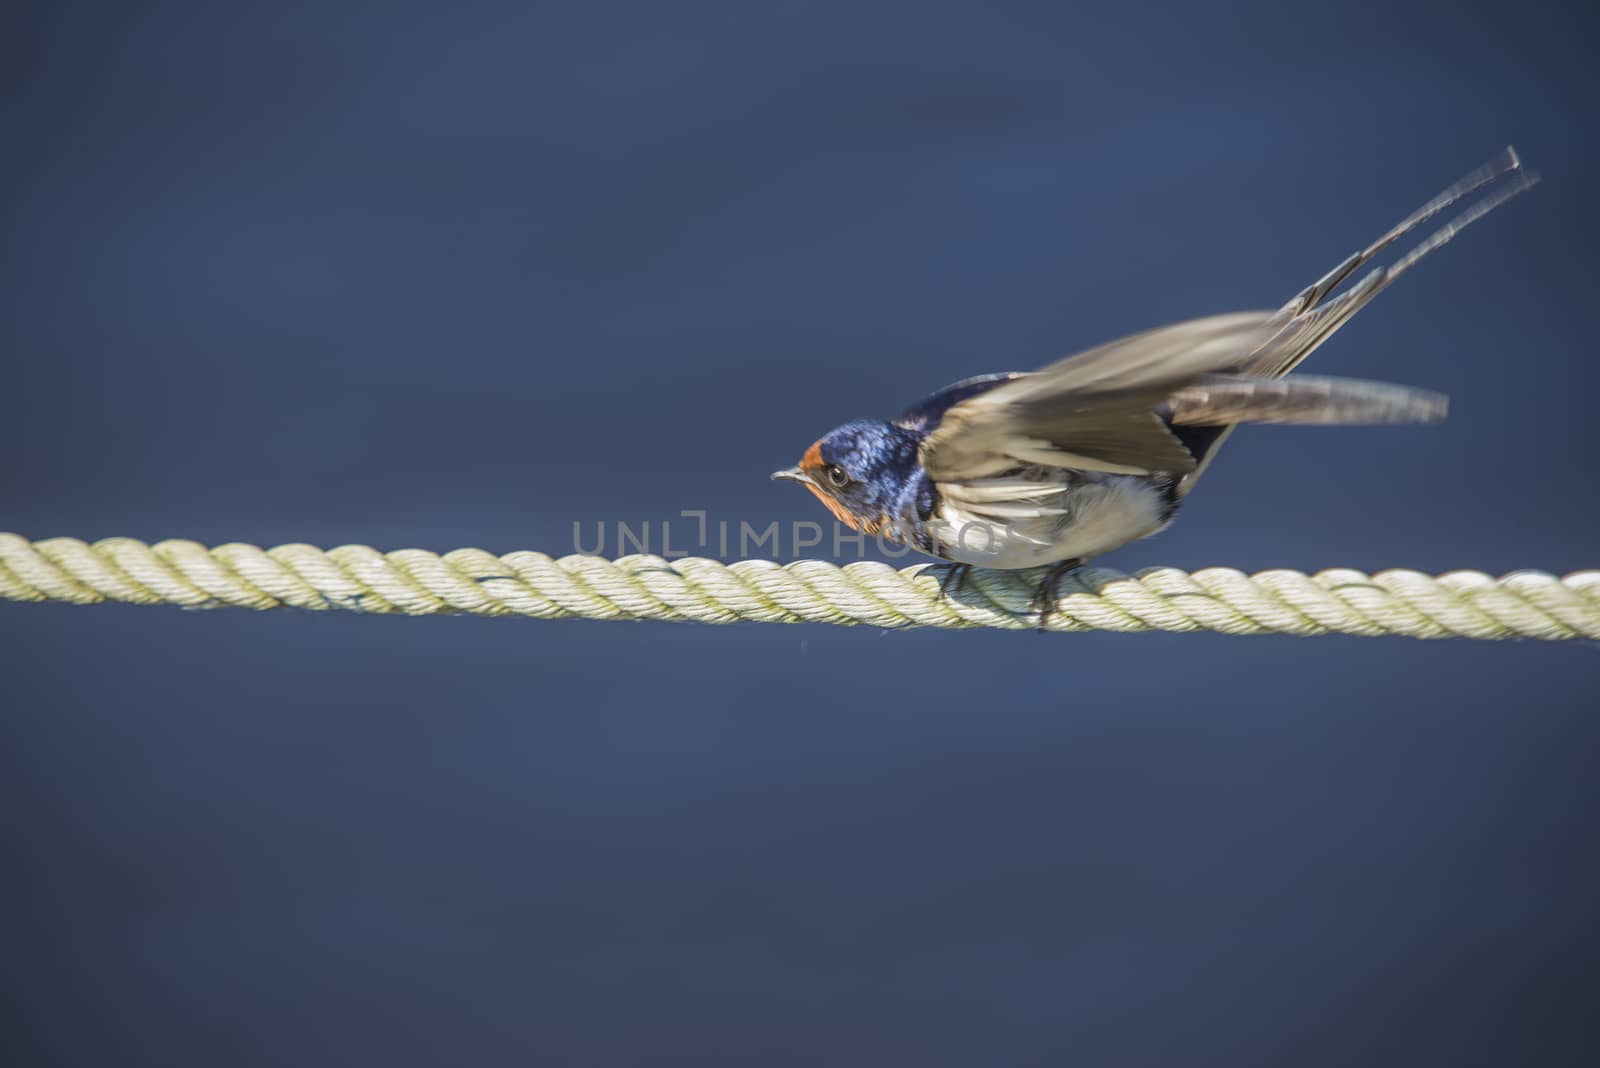 The swallow sitting on a mooring ropes at the Tista river in Halden, Norway.